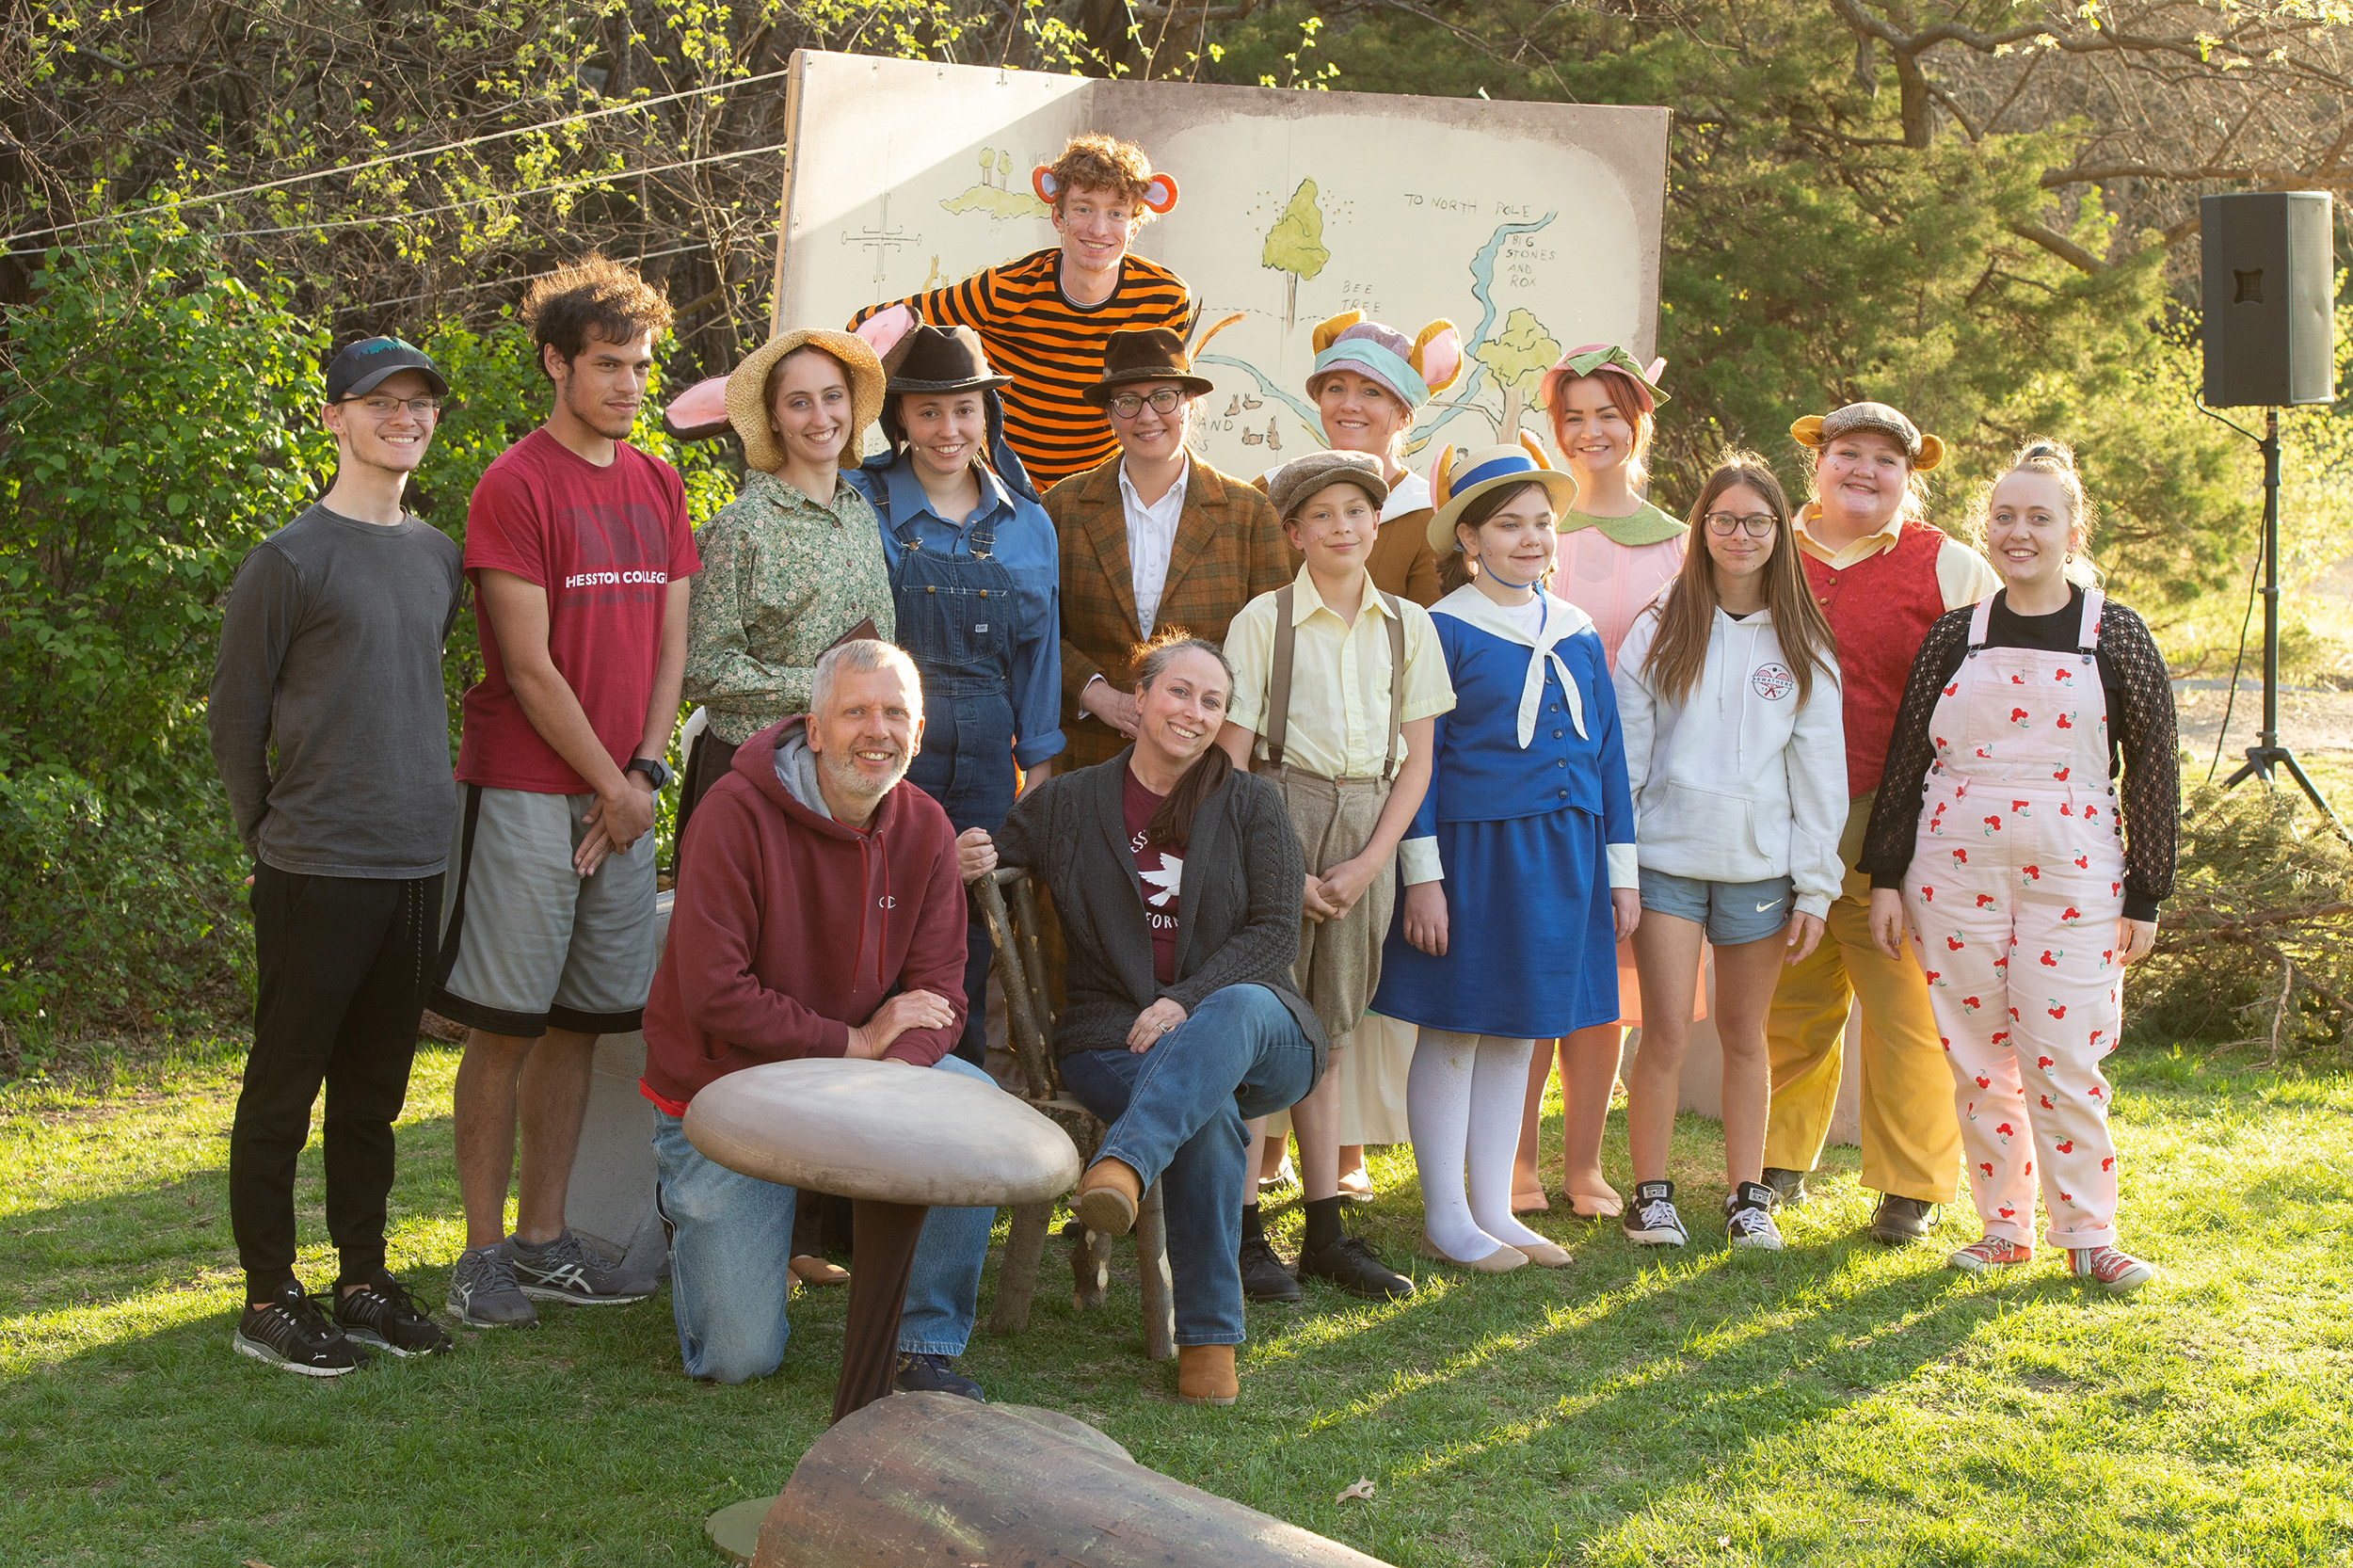 cast and crew photo - The House at Pooh Corner, Hesston College Theatre, spring 2022